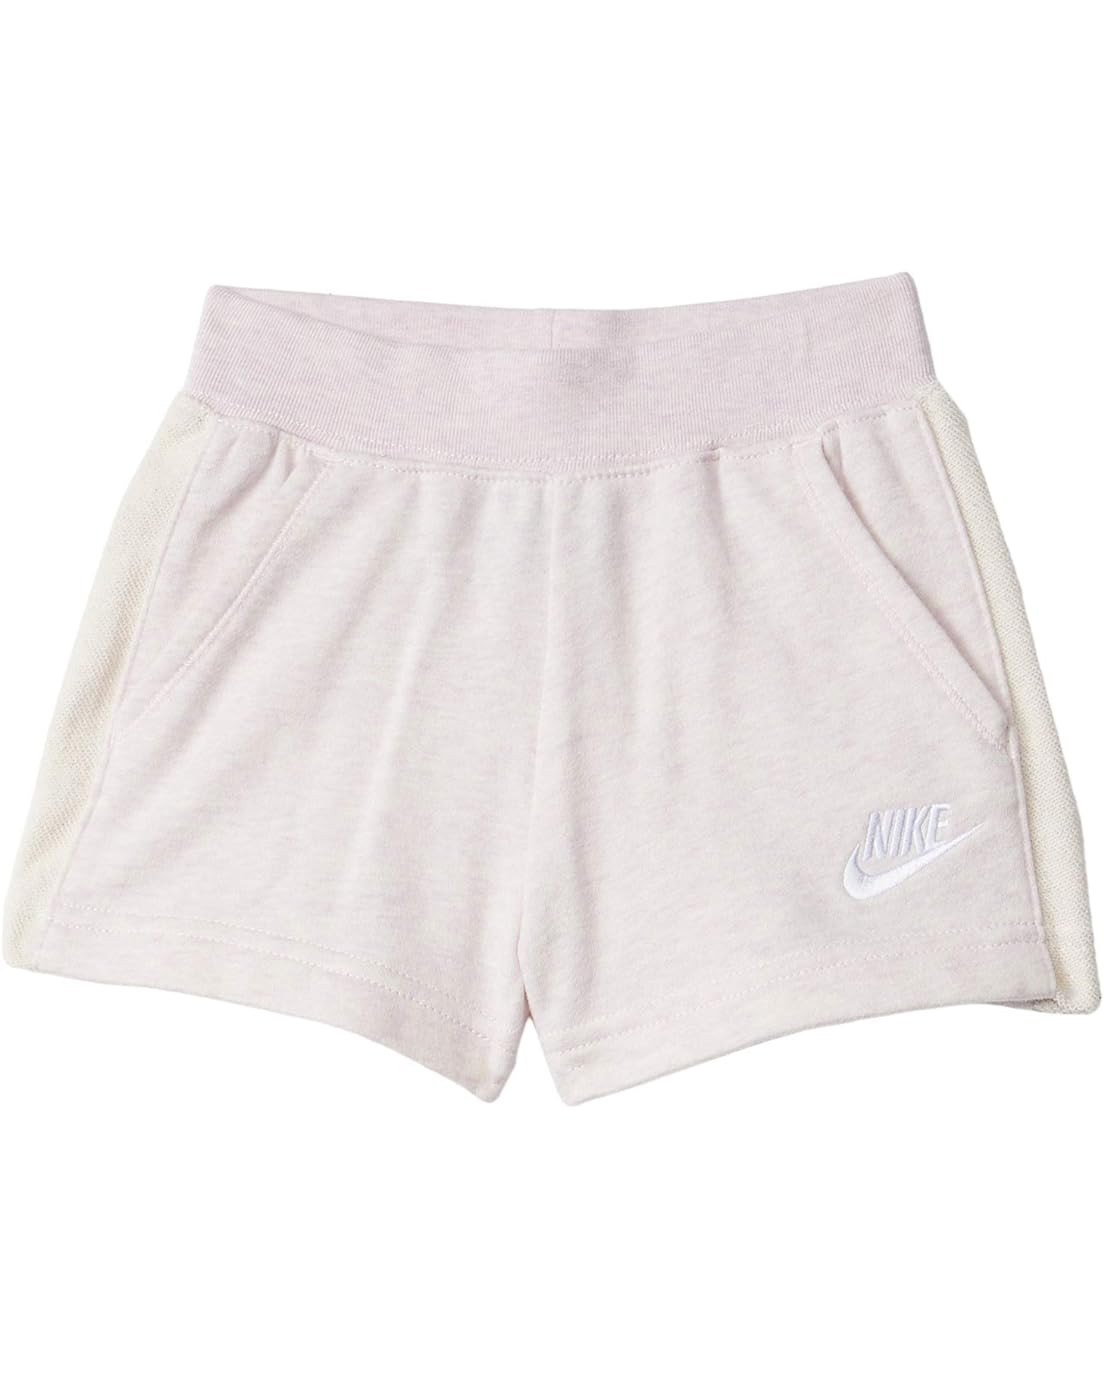 Nike Kids Lightweight French Terry Shorts (Toddler)